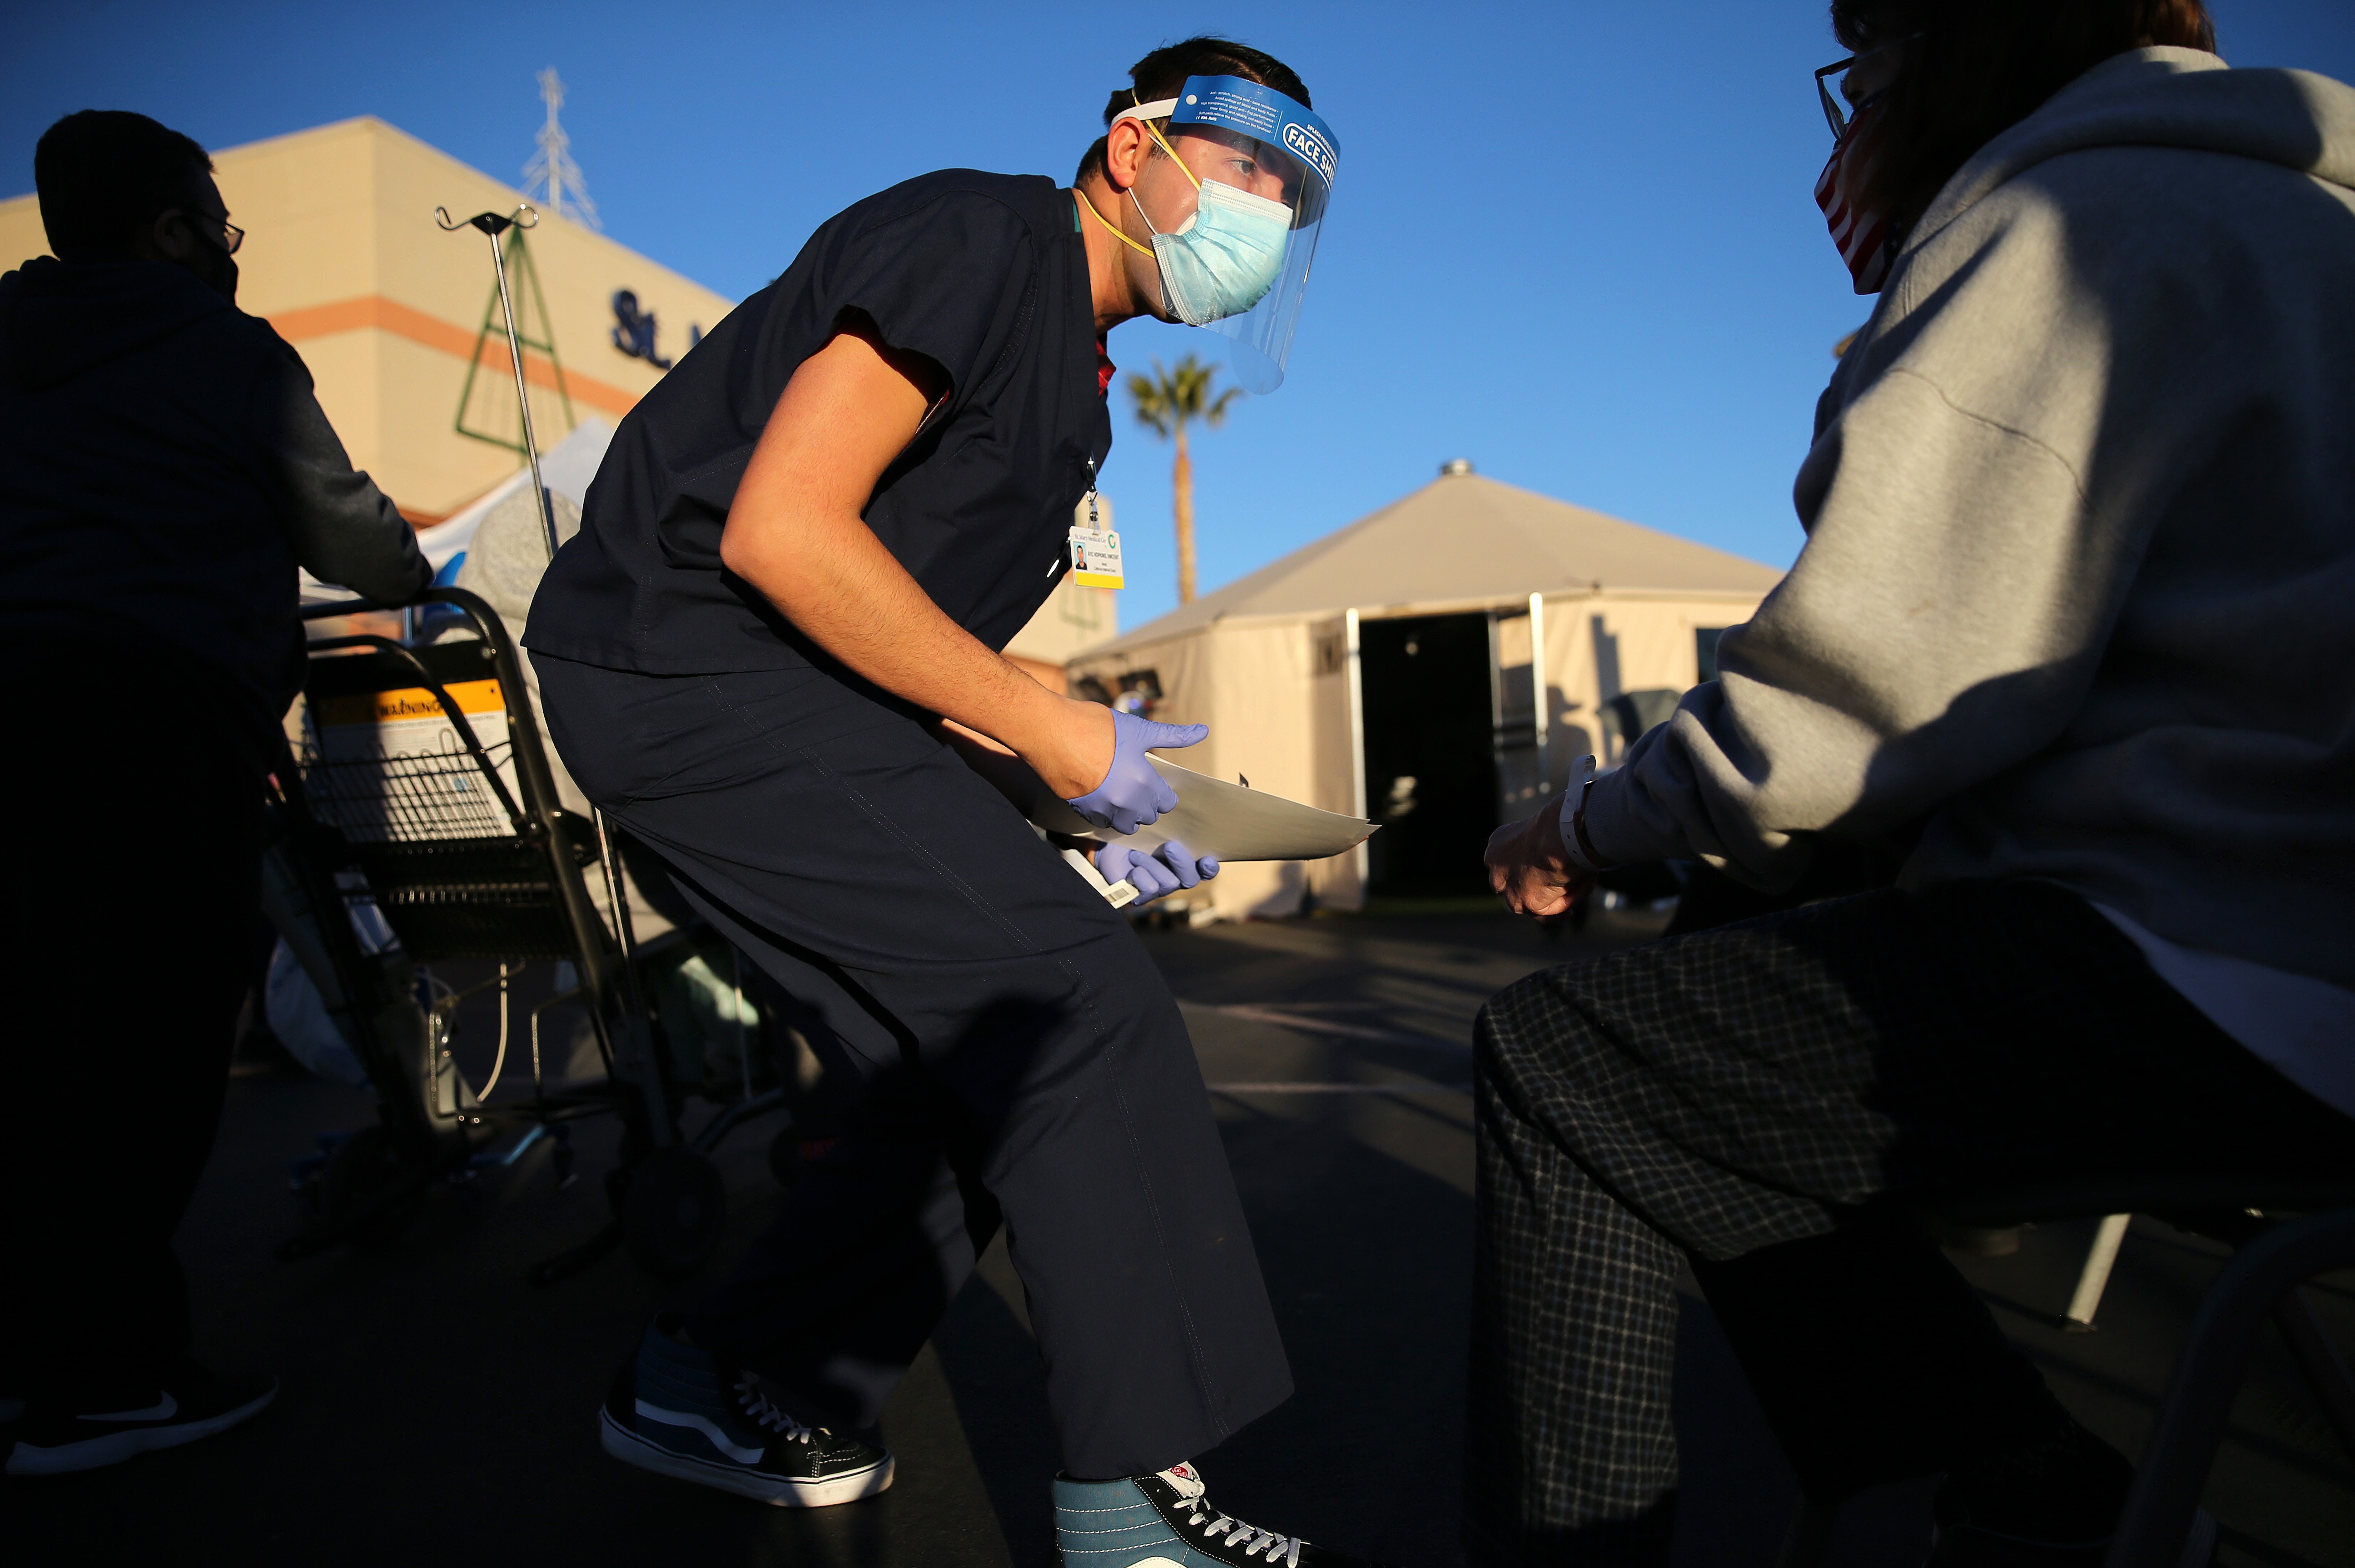 A California National Guard medic prepares to check the vital signs of an incoming patient in front of triage tents outside St. Mary Medical Center last week in Apple Valley amid a surge in COVID-19 patients in Southern California. CREDIT: Mario Tama/Getty Images